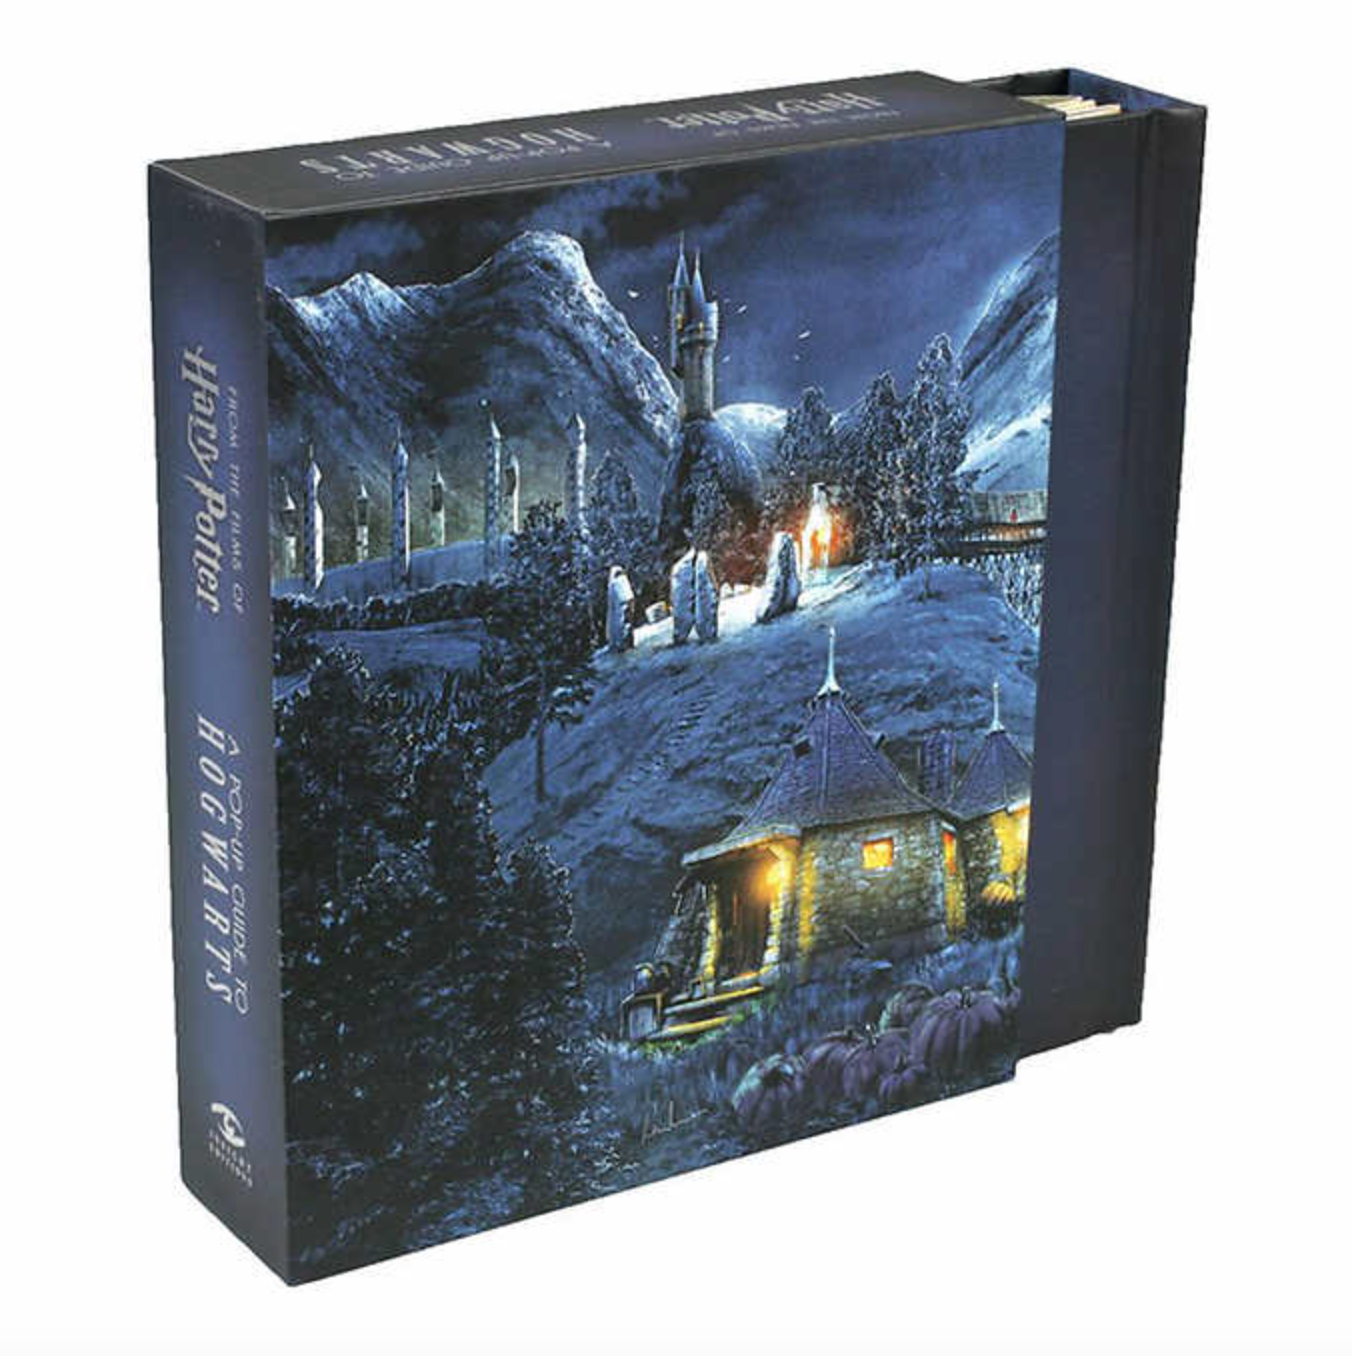 Harry Potter: A Pop-Up Guide Books